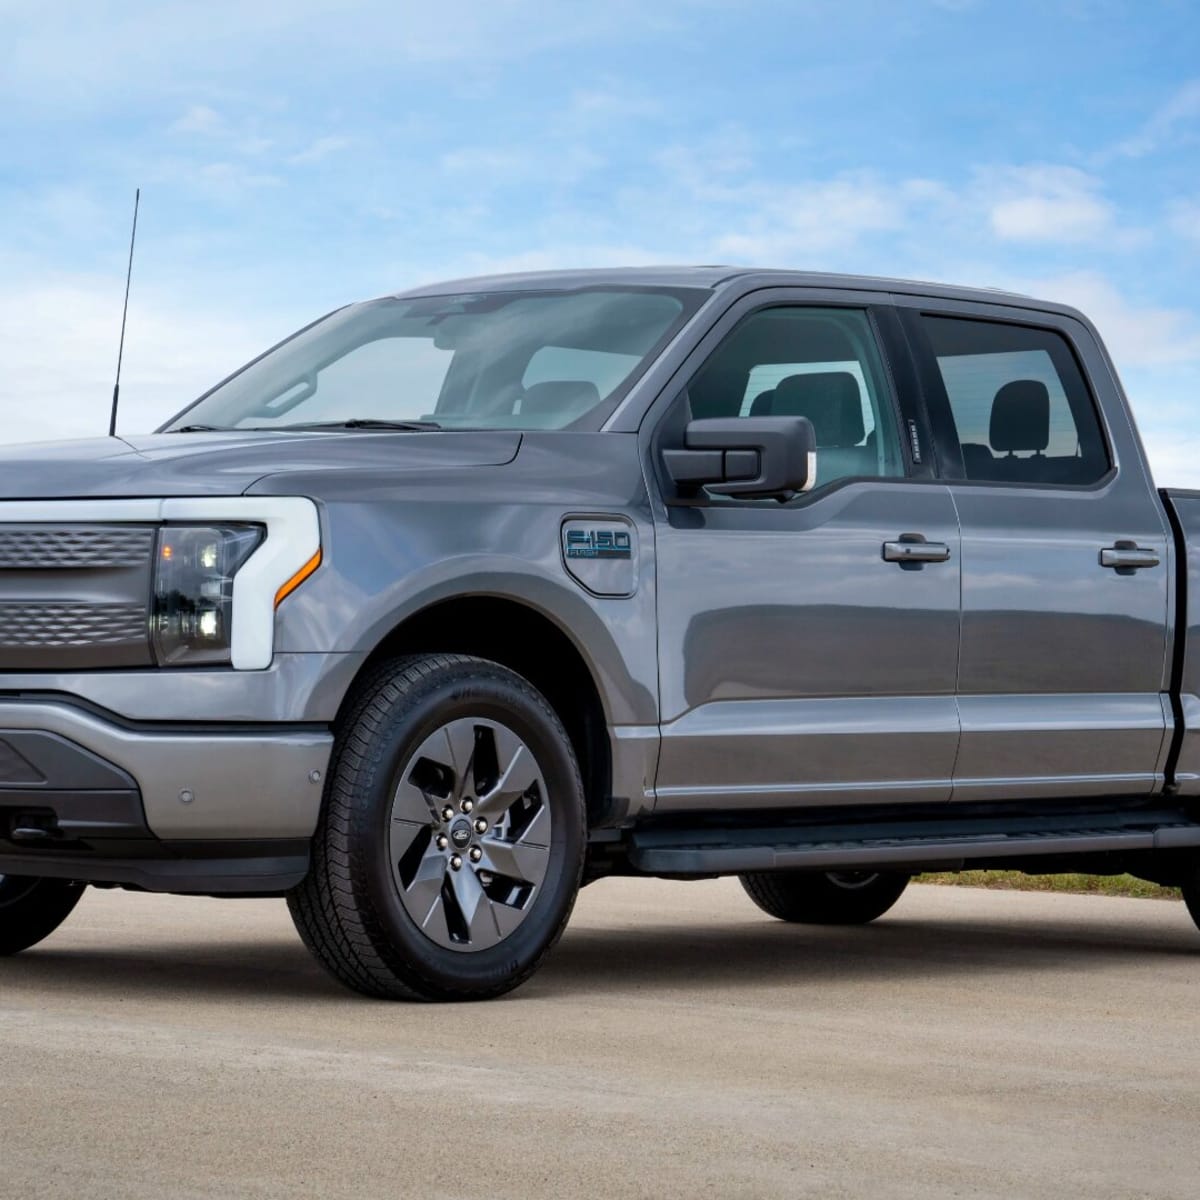 Up close with the Ford F-150 Lightning electric pickup truck - The Verge